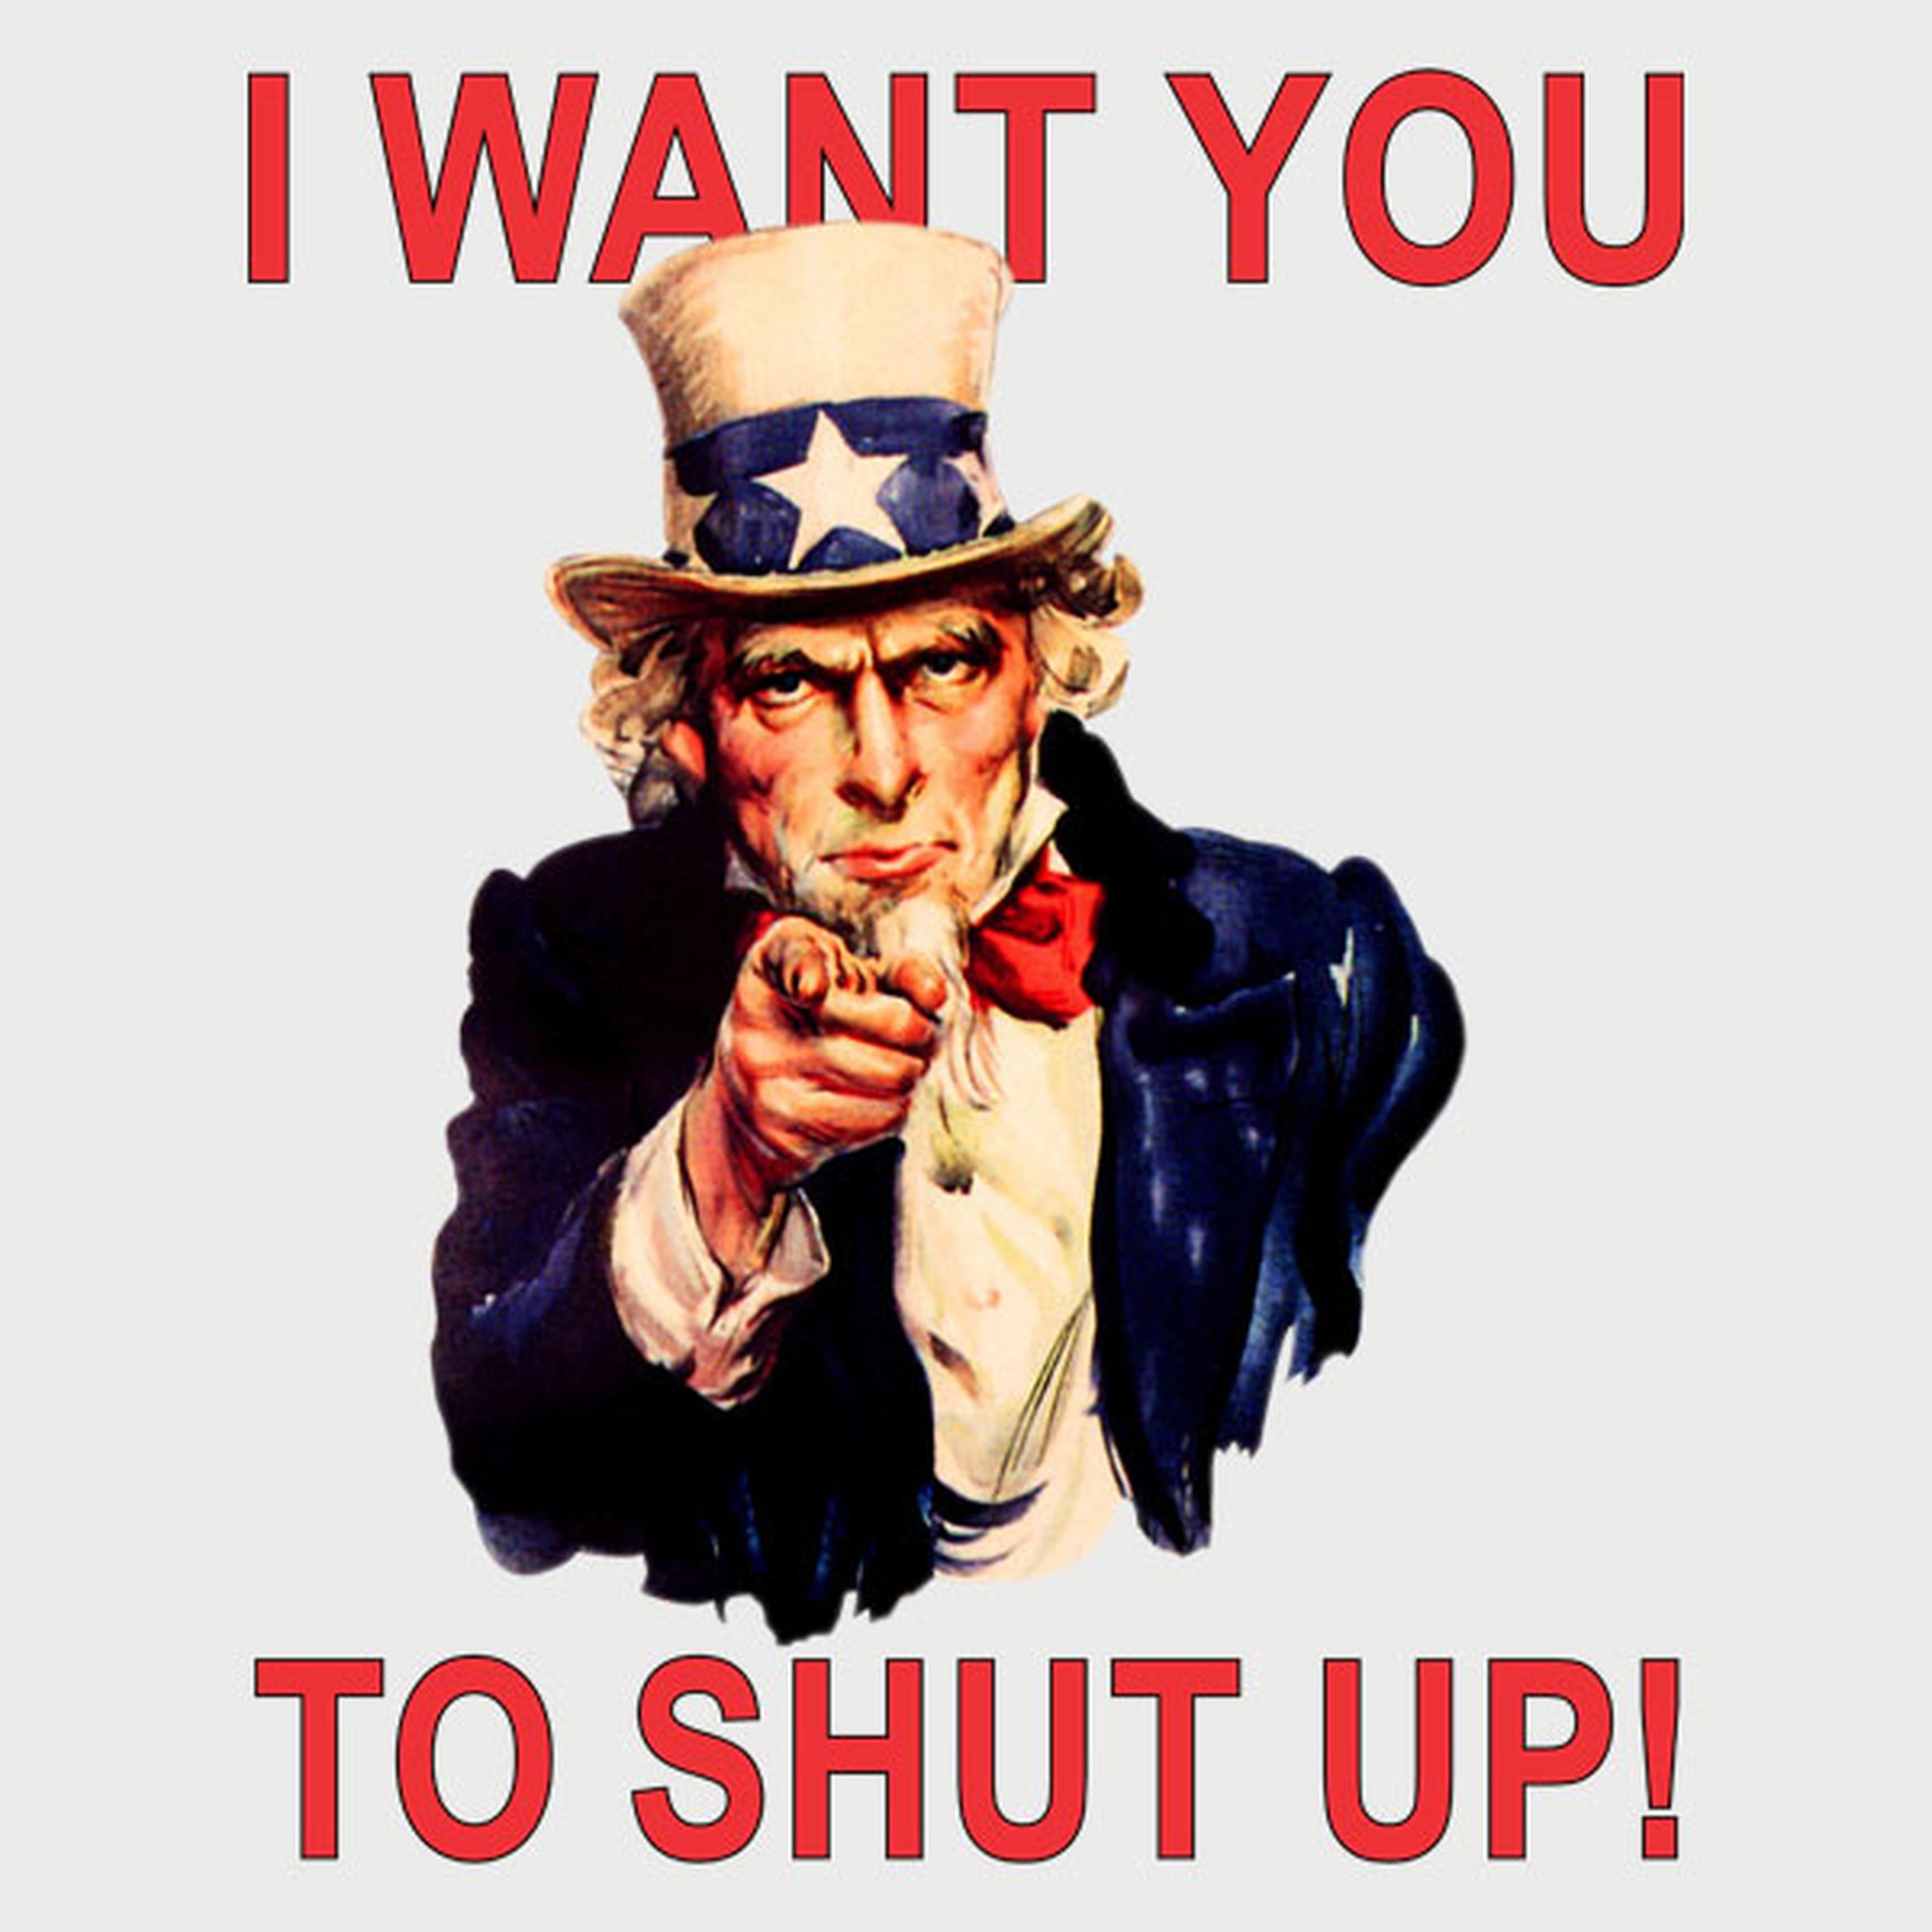 I want you to shut up